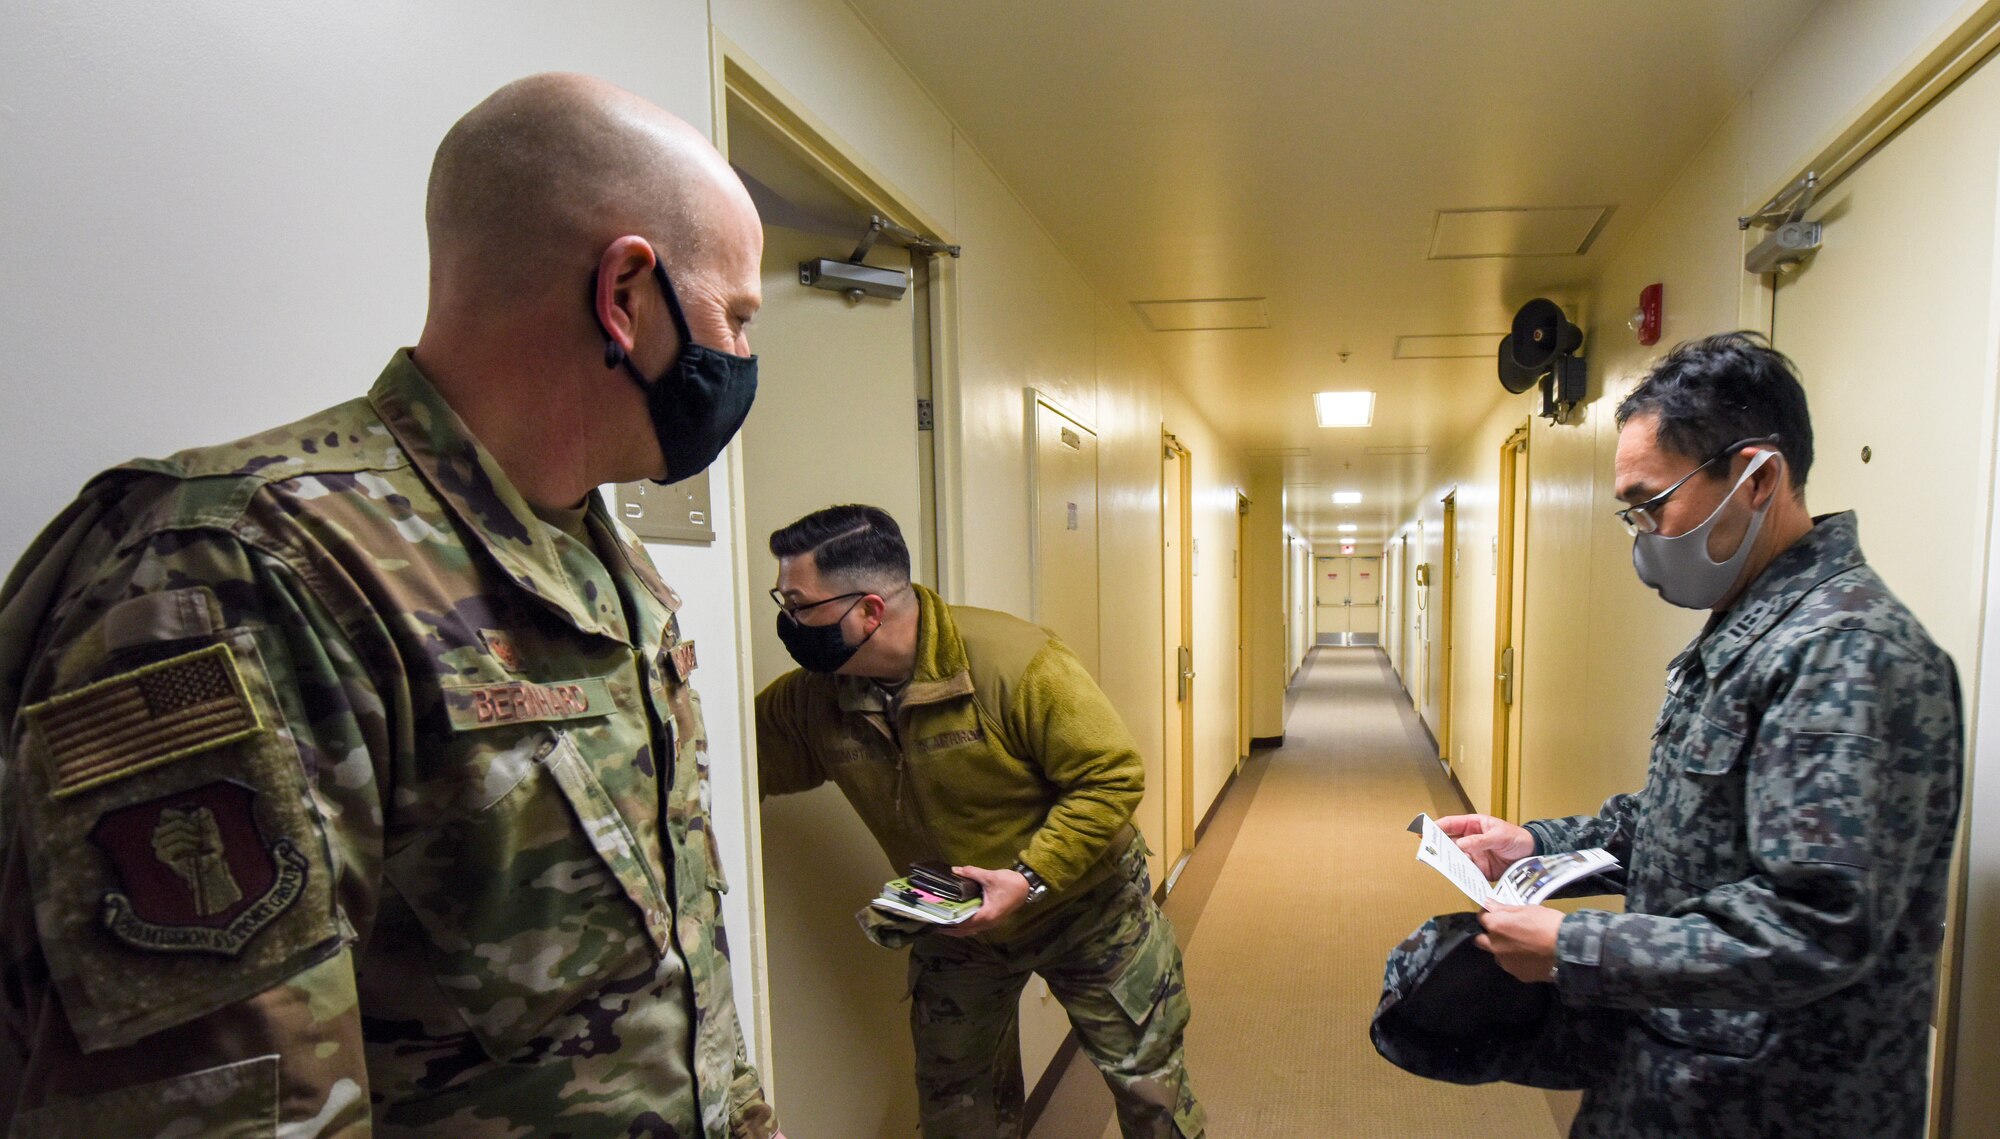 U.S. Air Force Master Sgt. William Castro, 35th Civil Engineer Squadron Unaccompanied Housing superintendent, opens a door to a dormitory room for Col. William Bernhard, 35th Mission Support Group commander, and Japan Air Self-Defense Force Col. Kato Fumihiko, 3rd Air Wing vice commander, during a tour of the unaccompanied housing dormitory campus at Misawa Air Base, Japan, Feb. 26, 2021. Bernhard hosted Fumihiko and other JASDF leaders on the tour as they learned about the 35th Fighter Wing's quality of life standards, room layouts, and other management techniques used to provide a quality living standard for unaccompanied Airmen. (U.S. Air Force photo by Tech. Sgt. Timothy Moore)